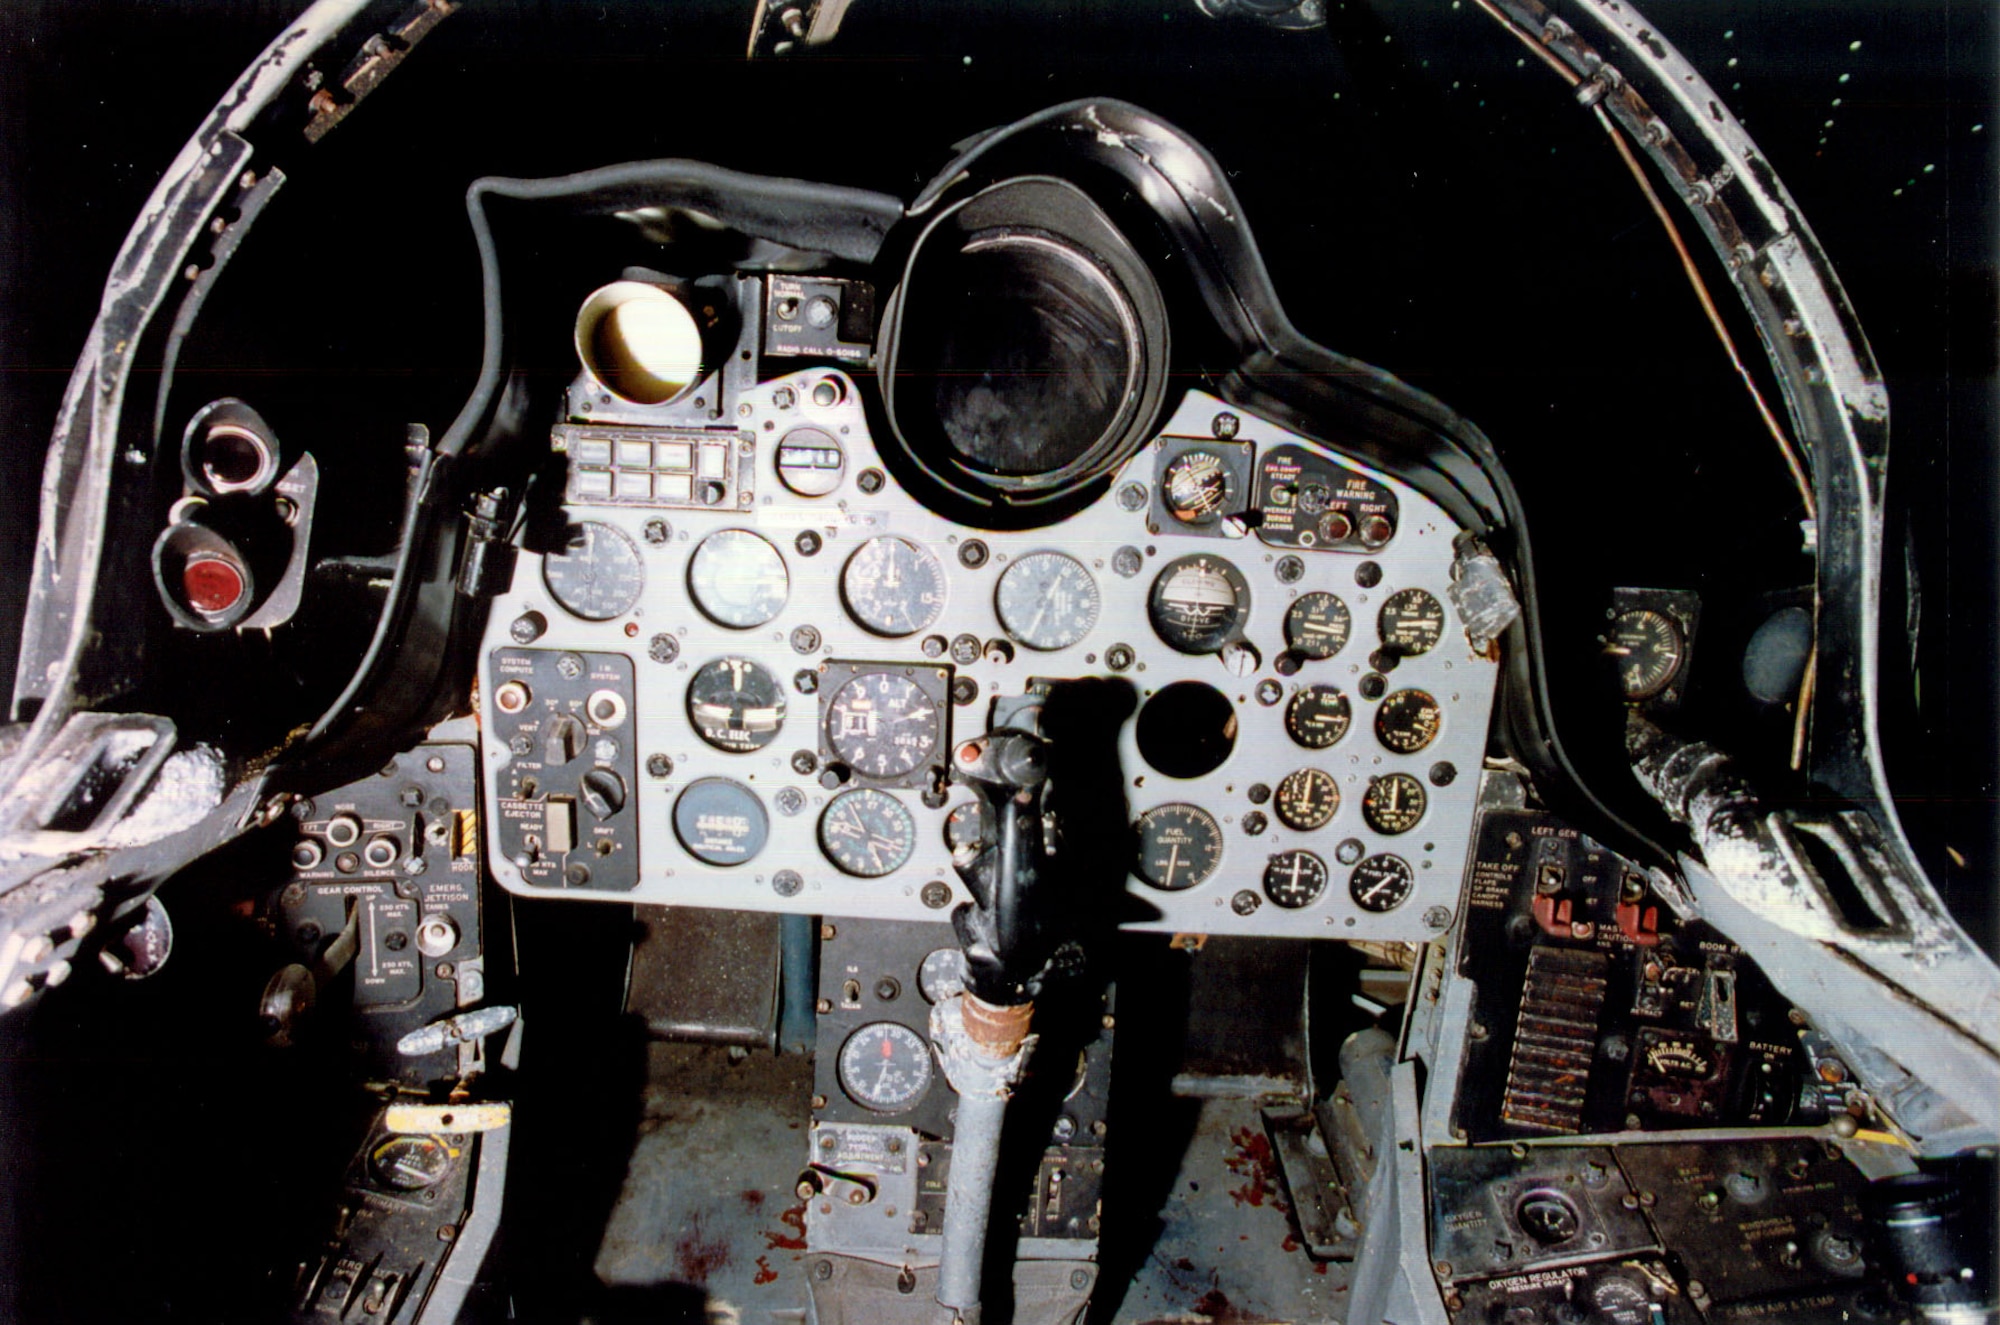 DAYTON, Ohio -- McDonnell RF-101C cockpit at the National Museum of the United States Air Force. (U.S. Air Force photo)